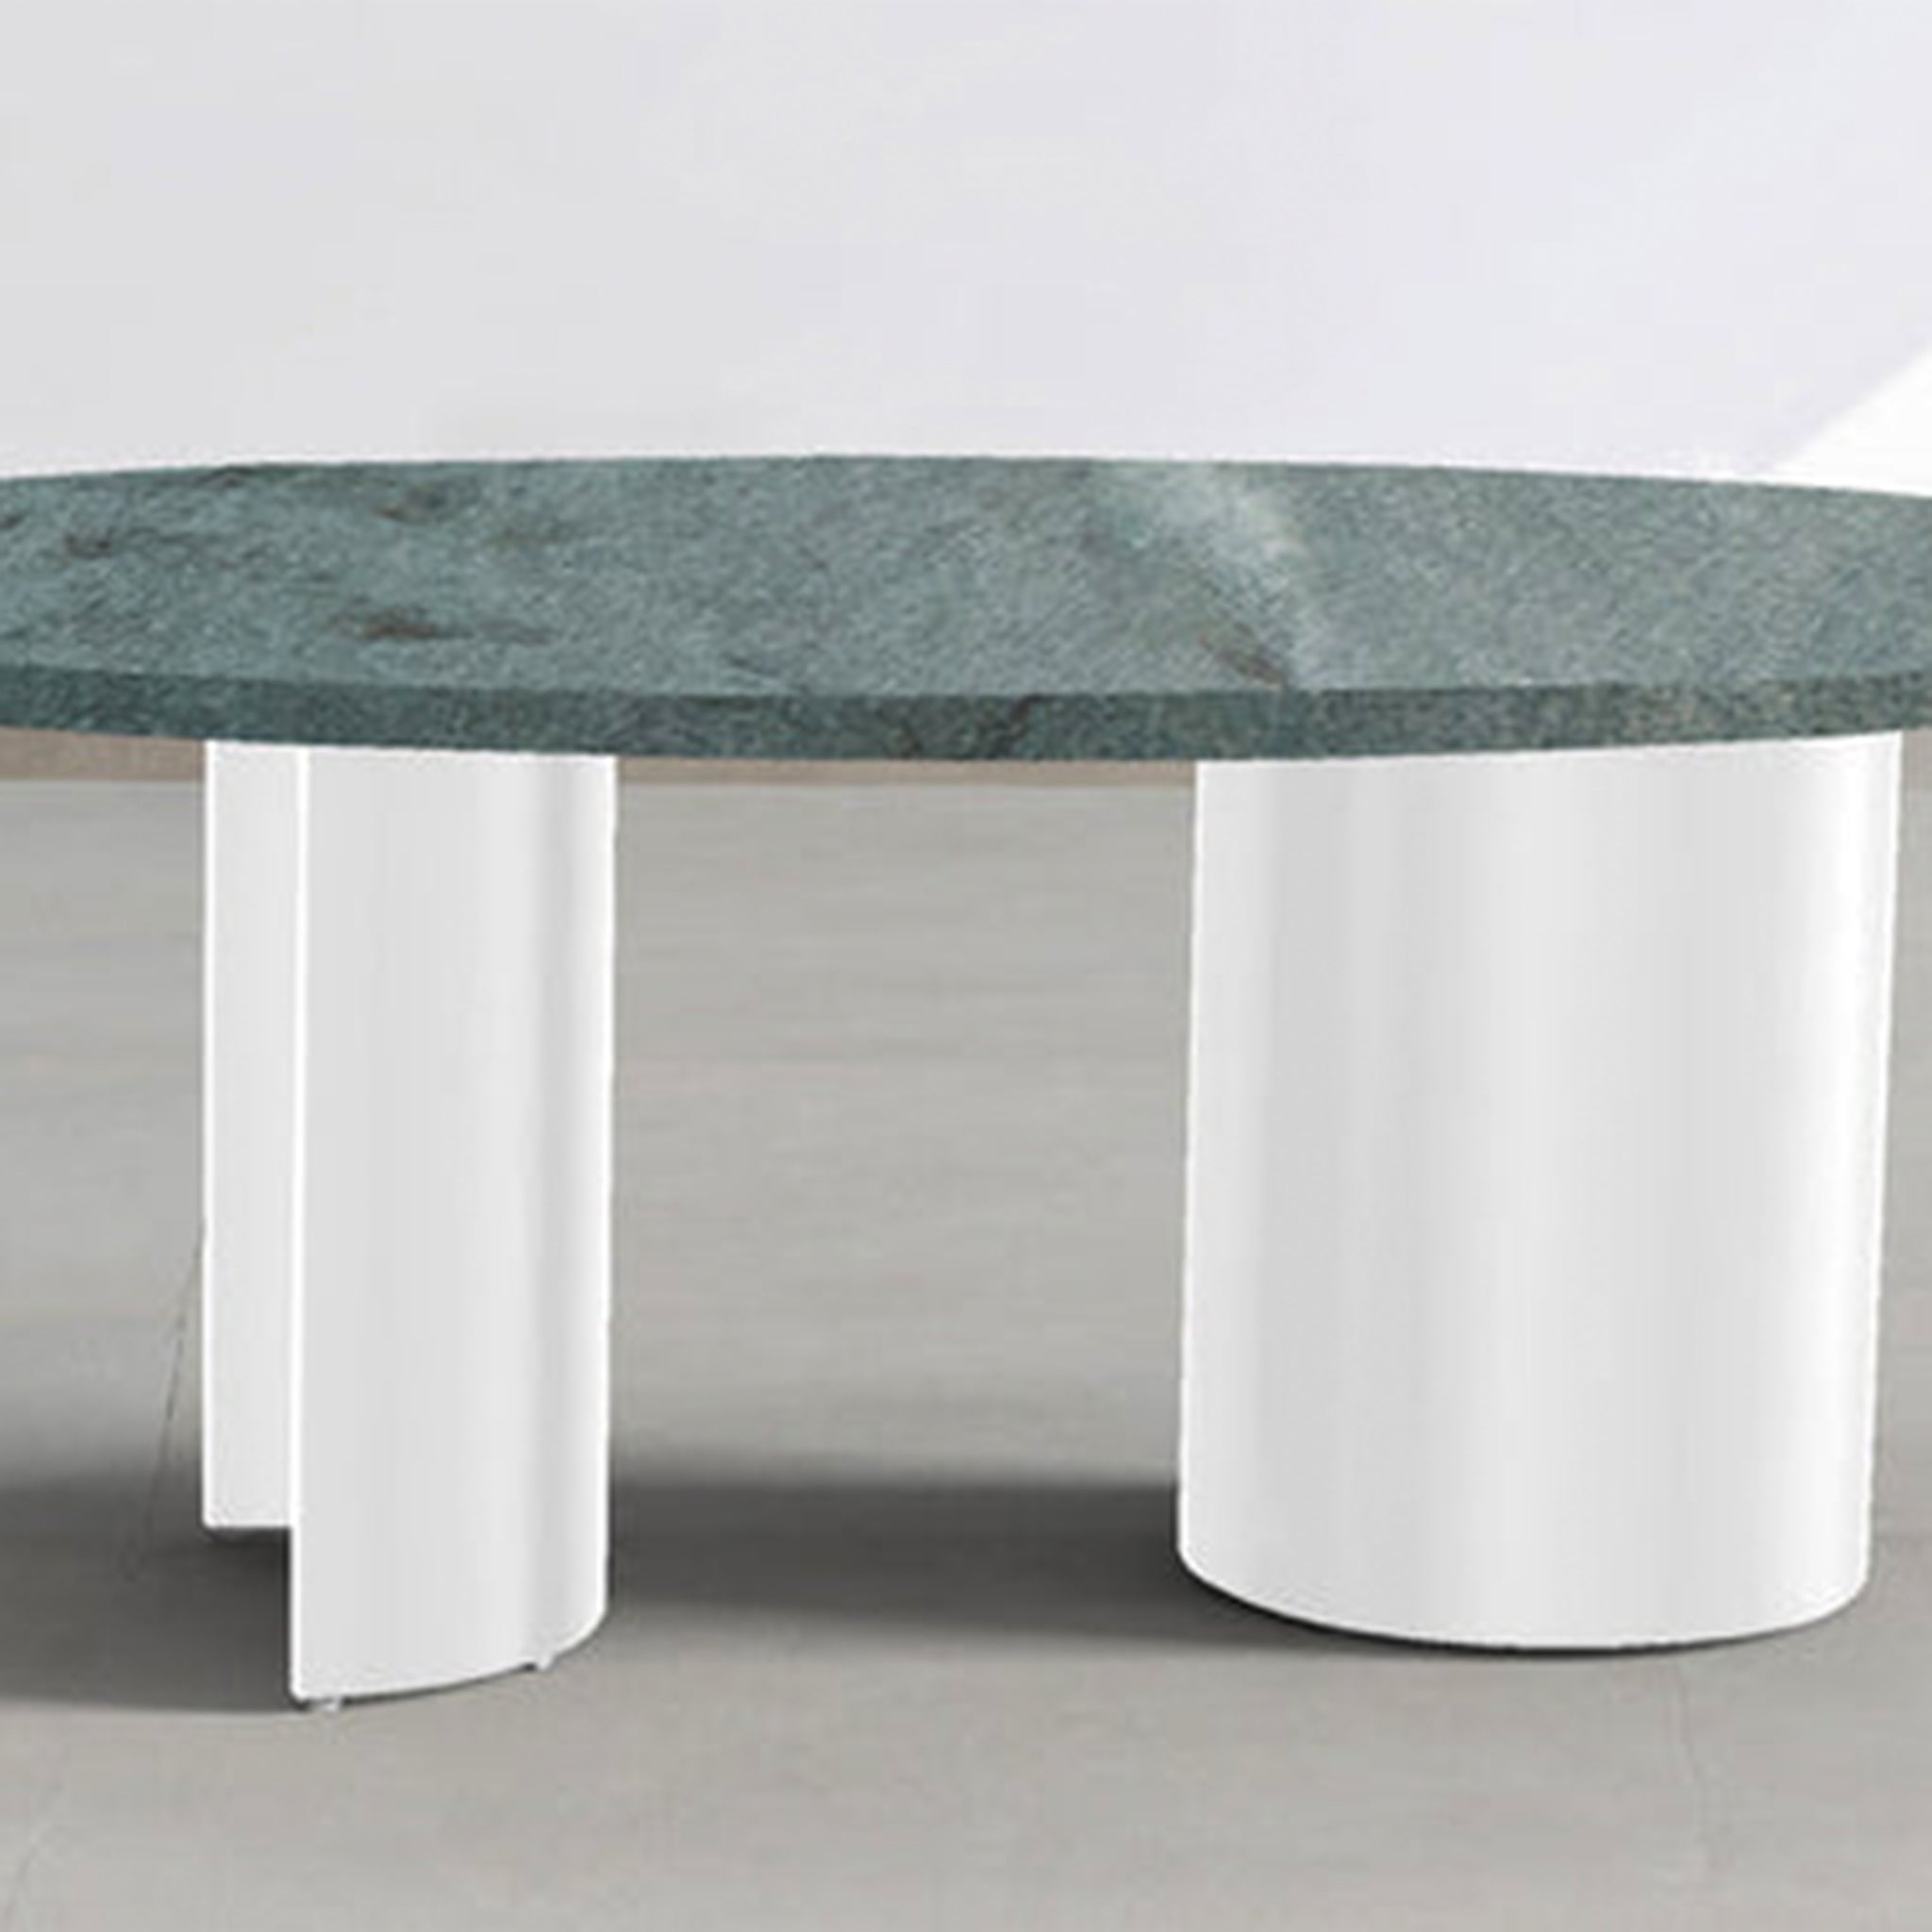 Large Coffee Table: 100cm diameter provides ample surface area.